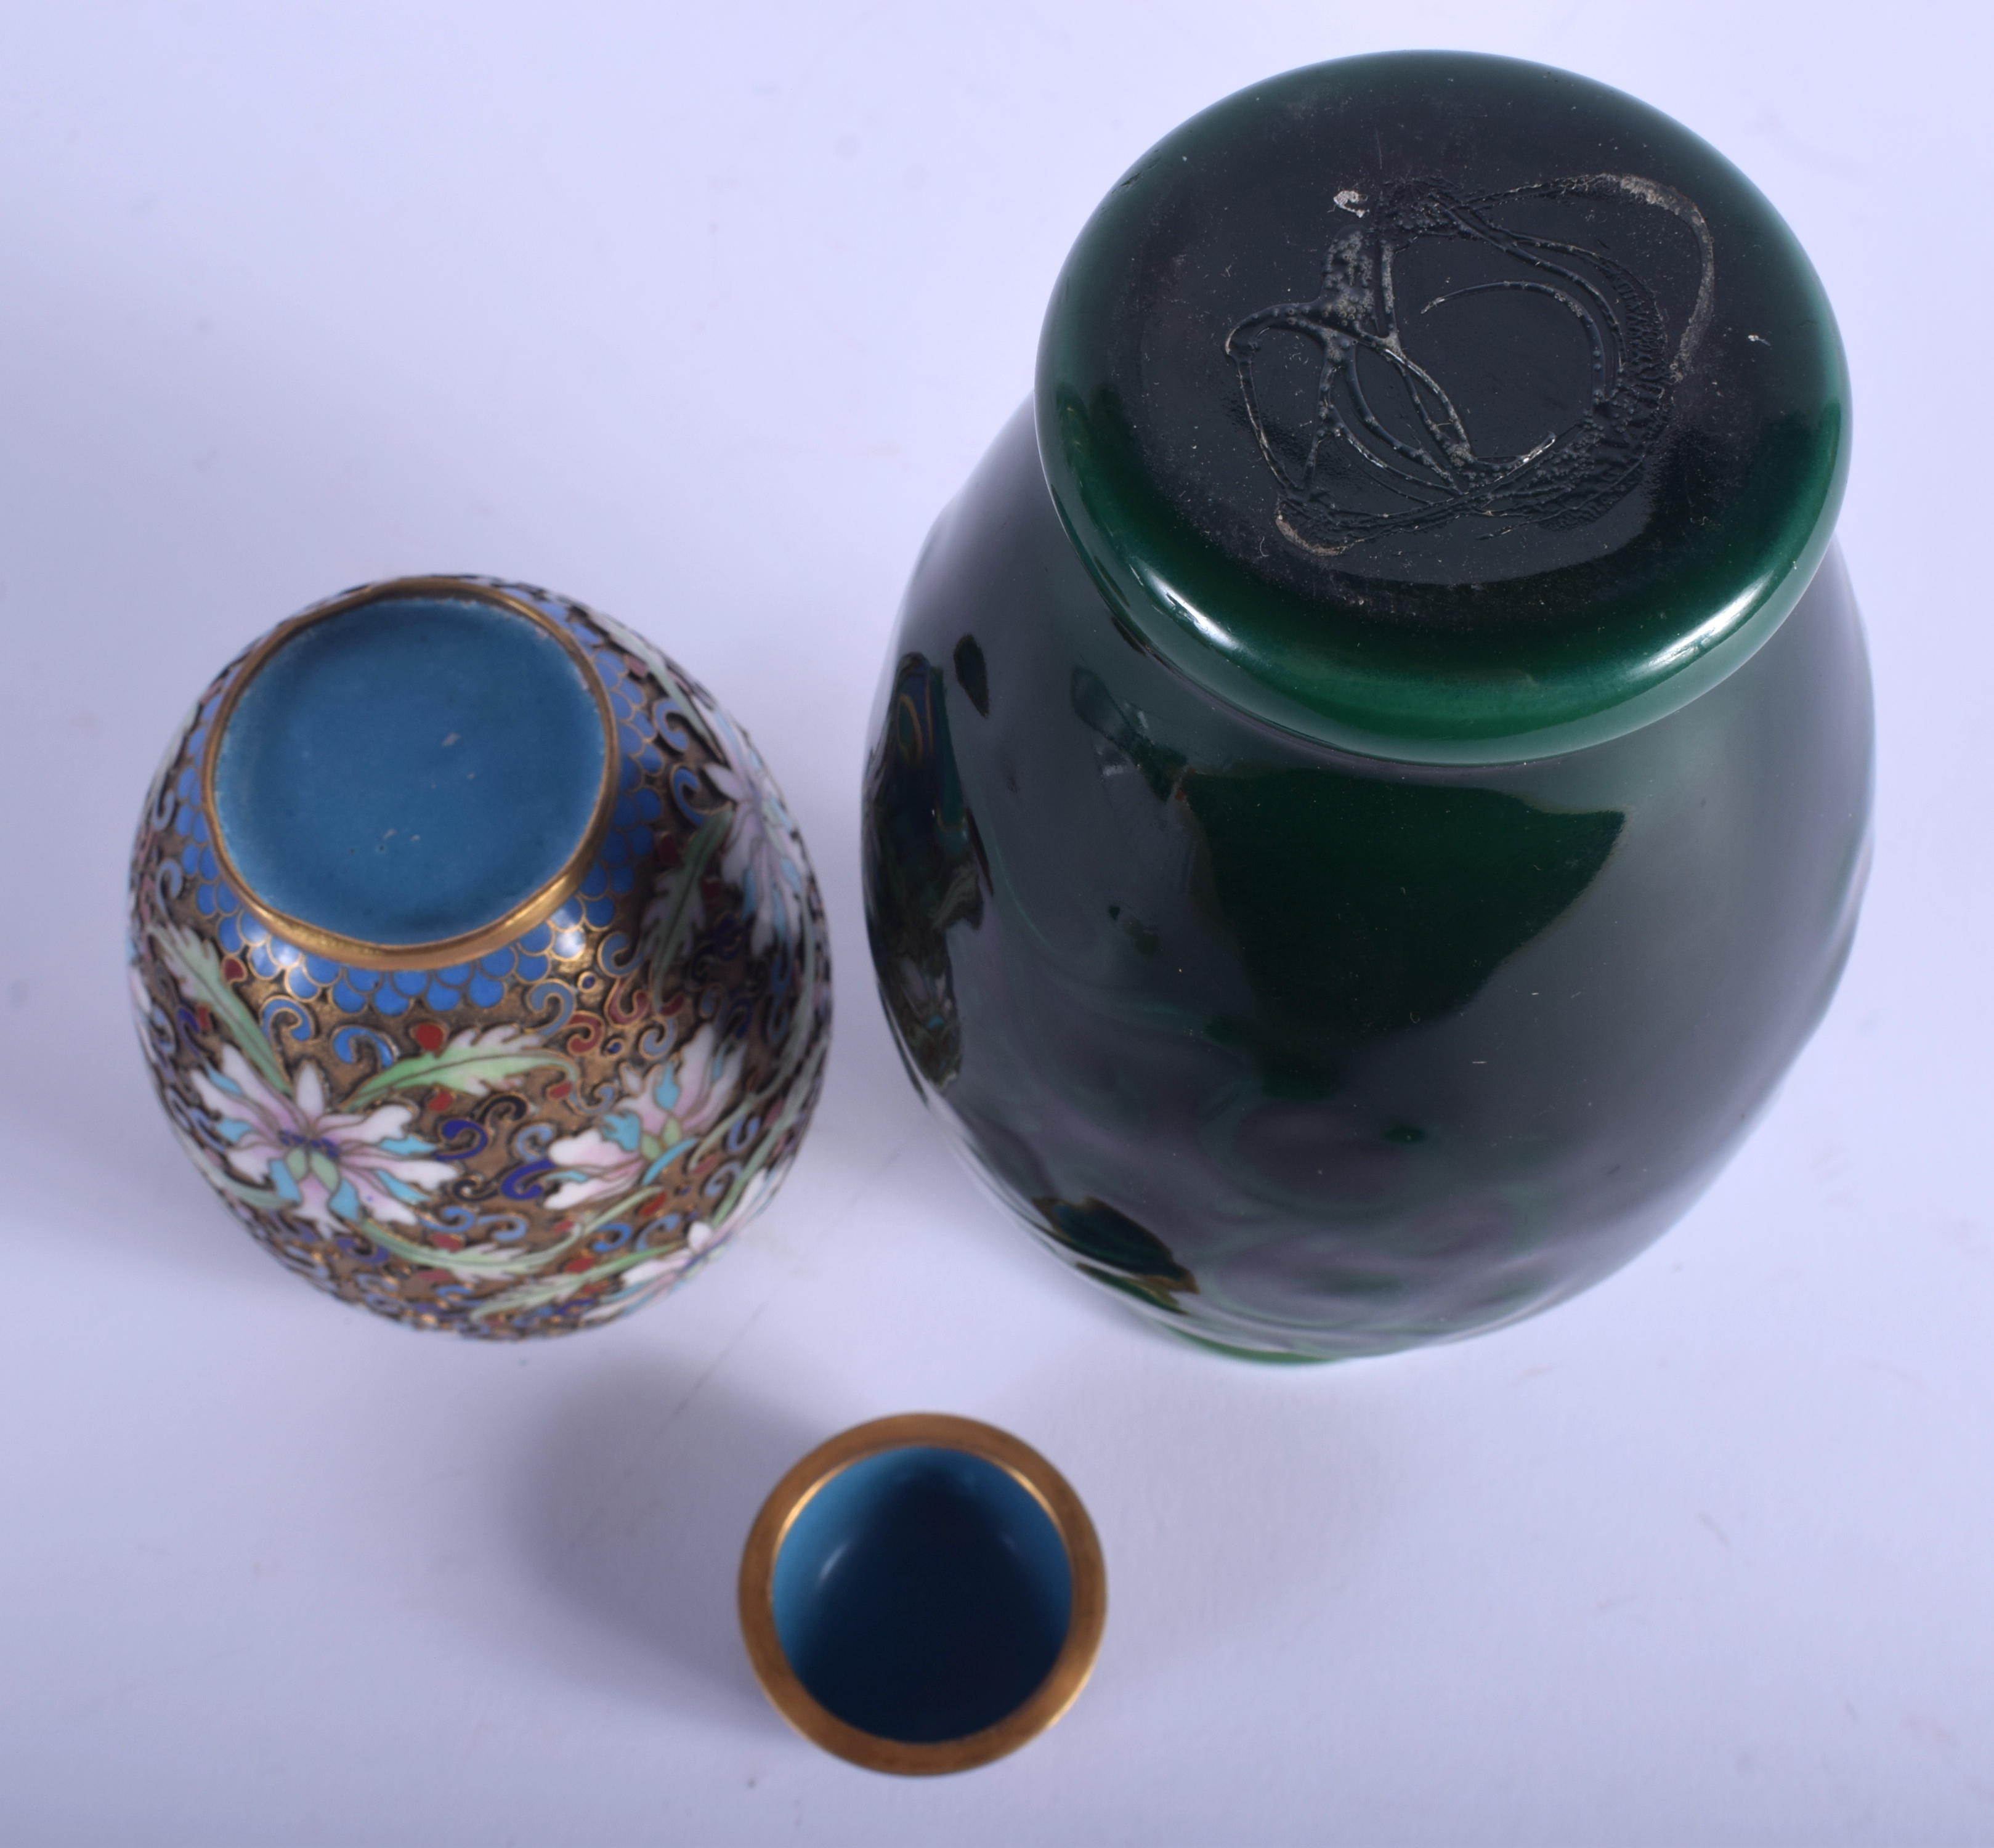 AN EARLY 20TH CENTURY CHINESE CLOISONNE ENAMEL VASE AND COVER together with a Peking style vase. La - Image 4 of 10